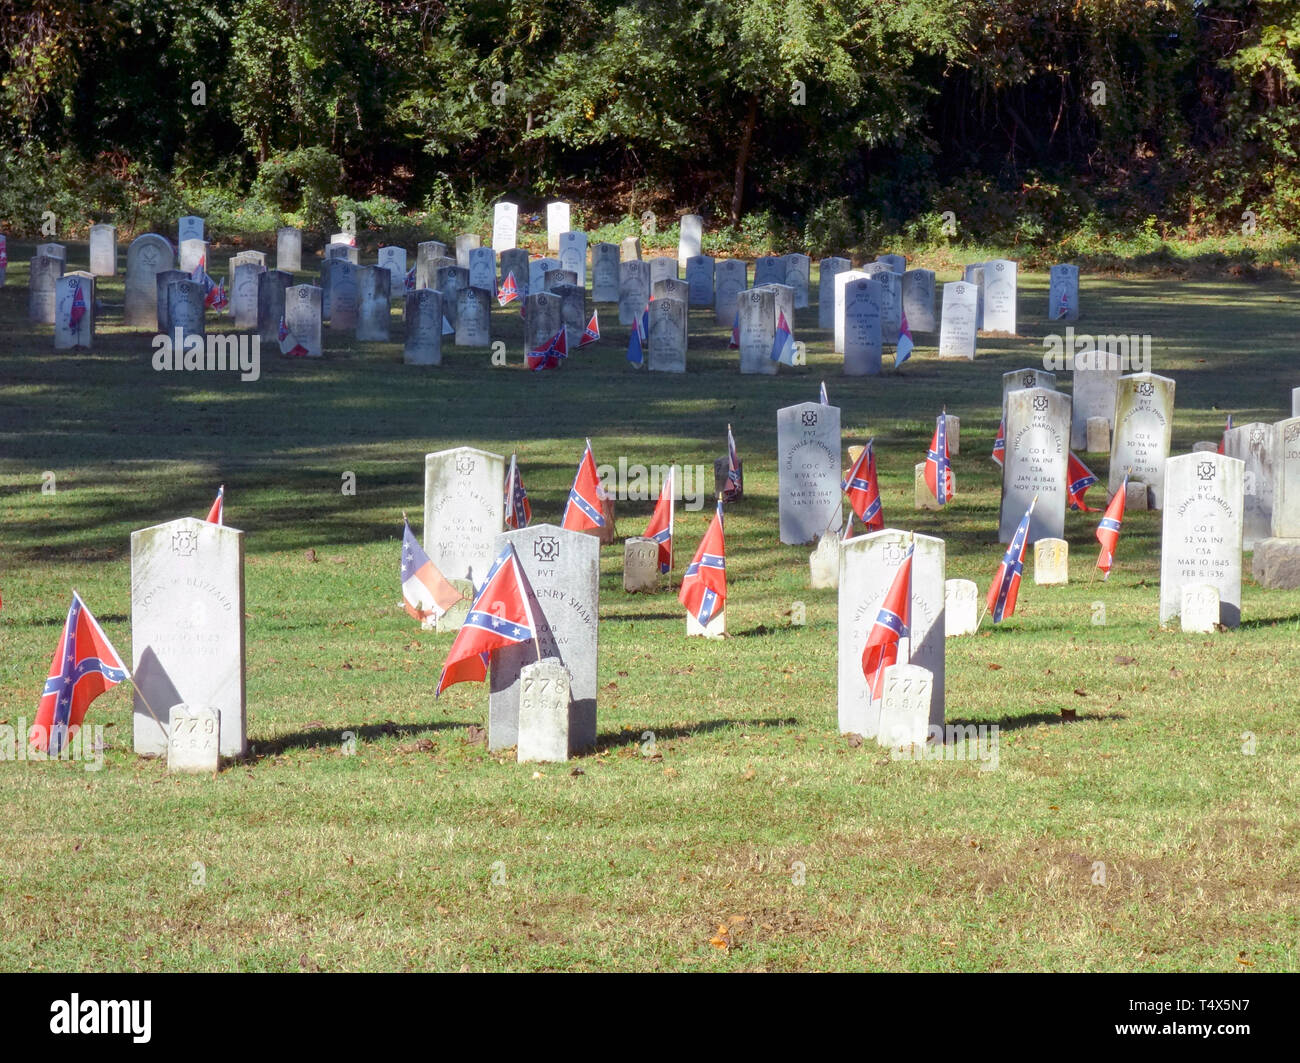 Gravestones for known and unknown Confederate soldiers, Richmond, Virginia, US, 2017. Stock Photo